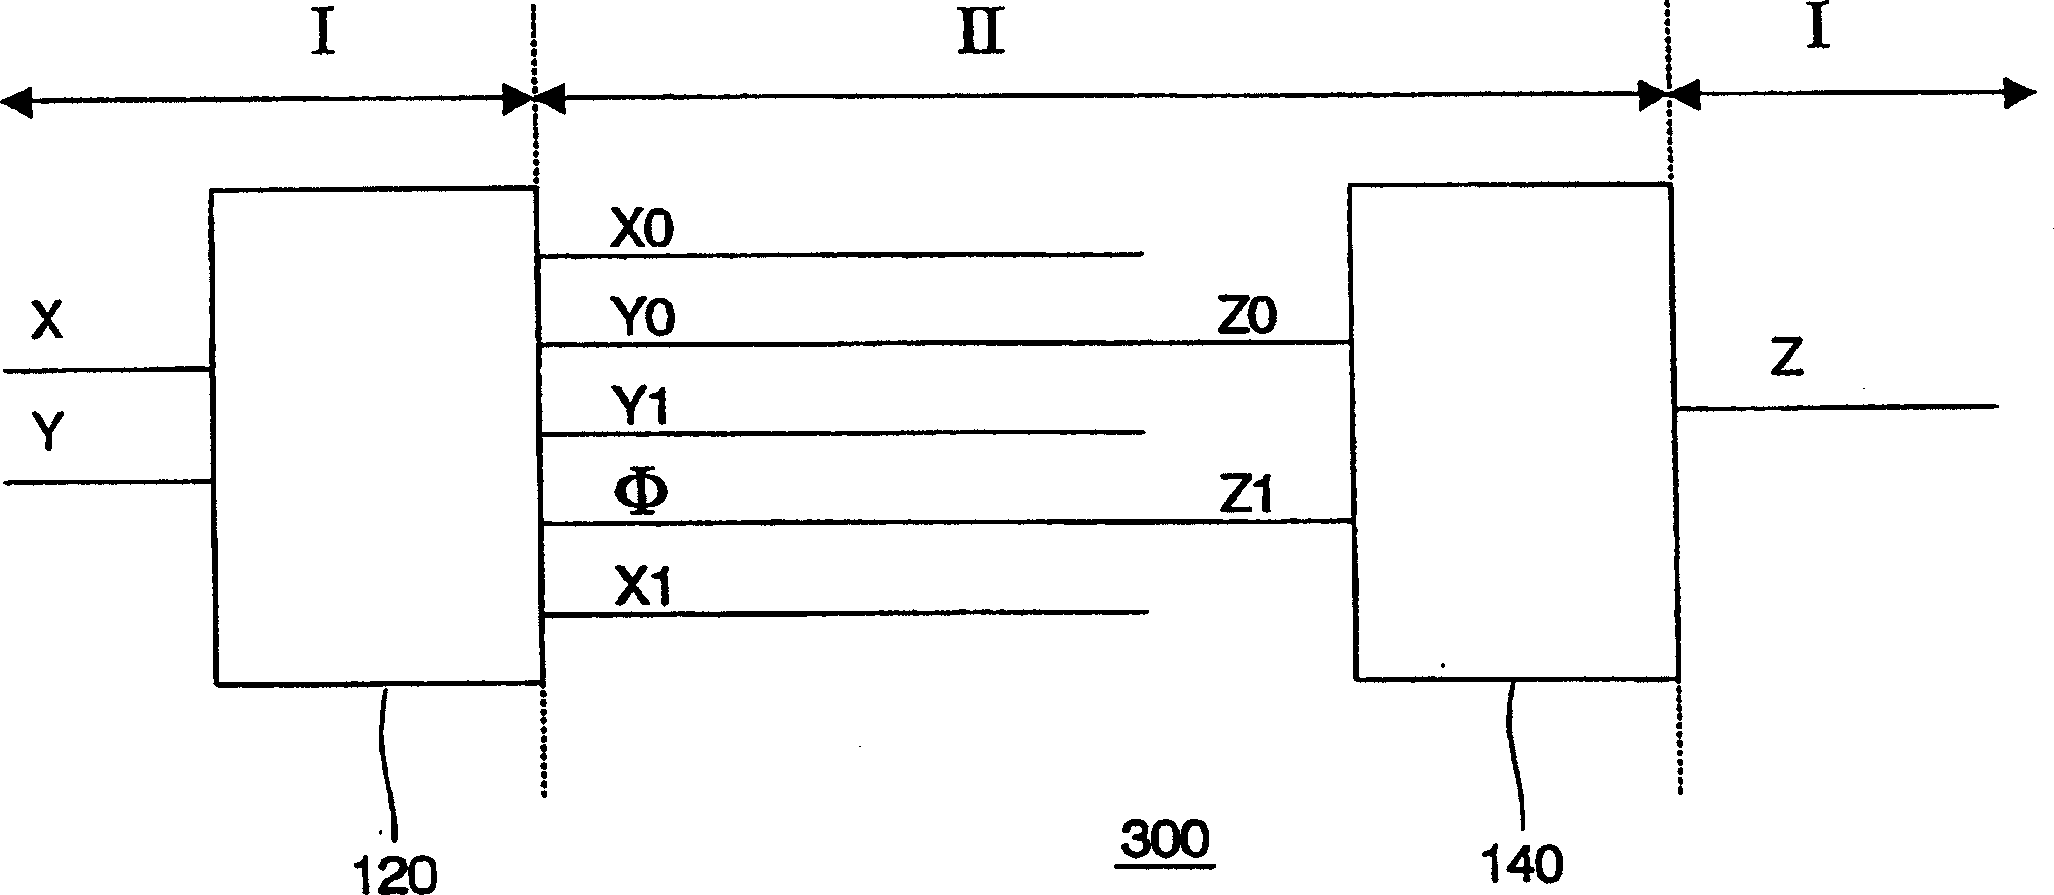 Coding of information in integrated circuits